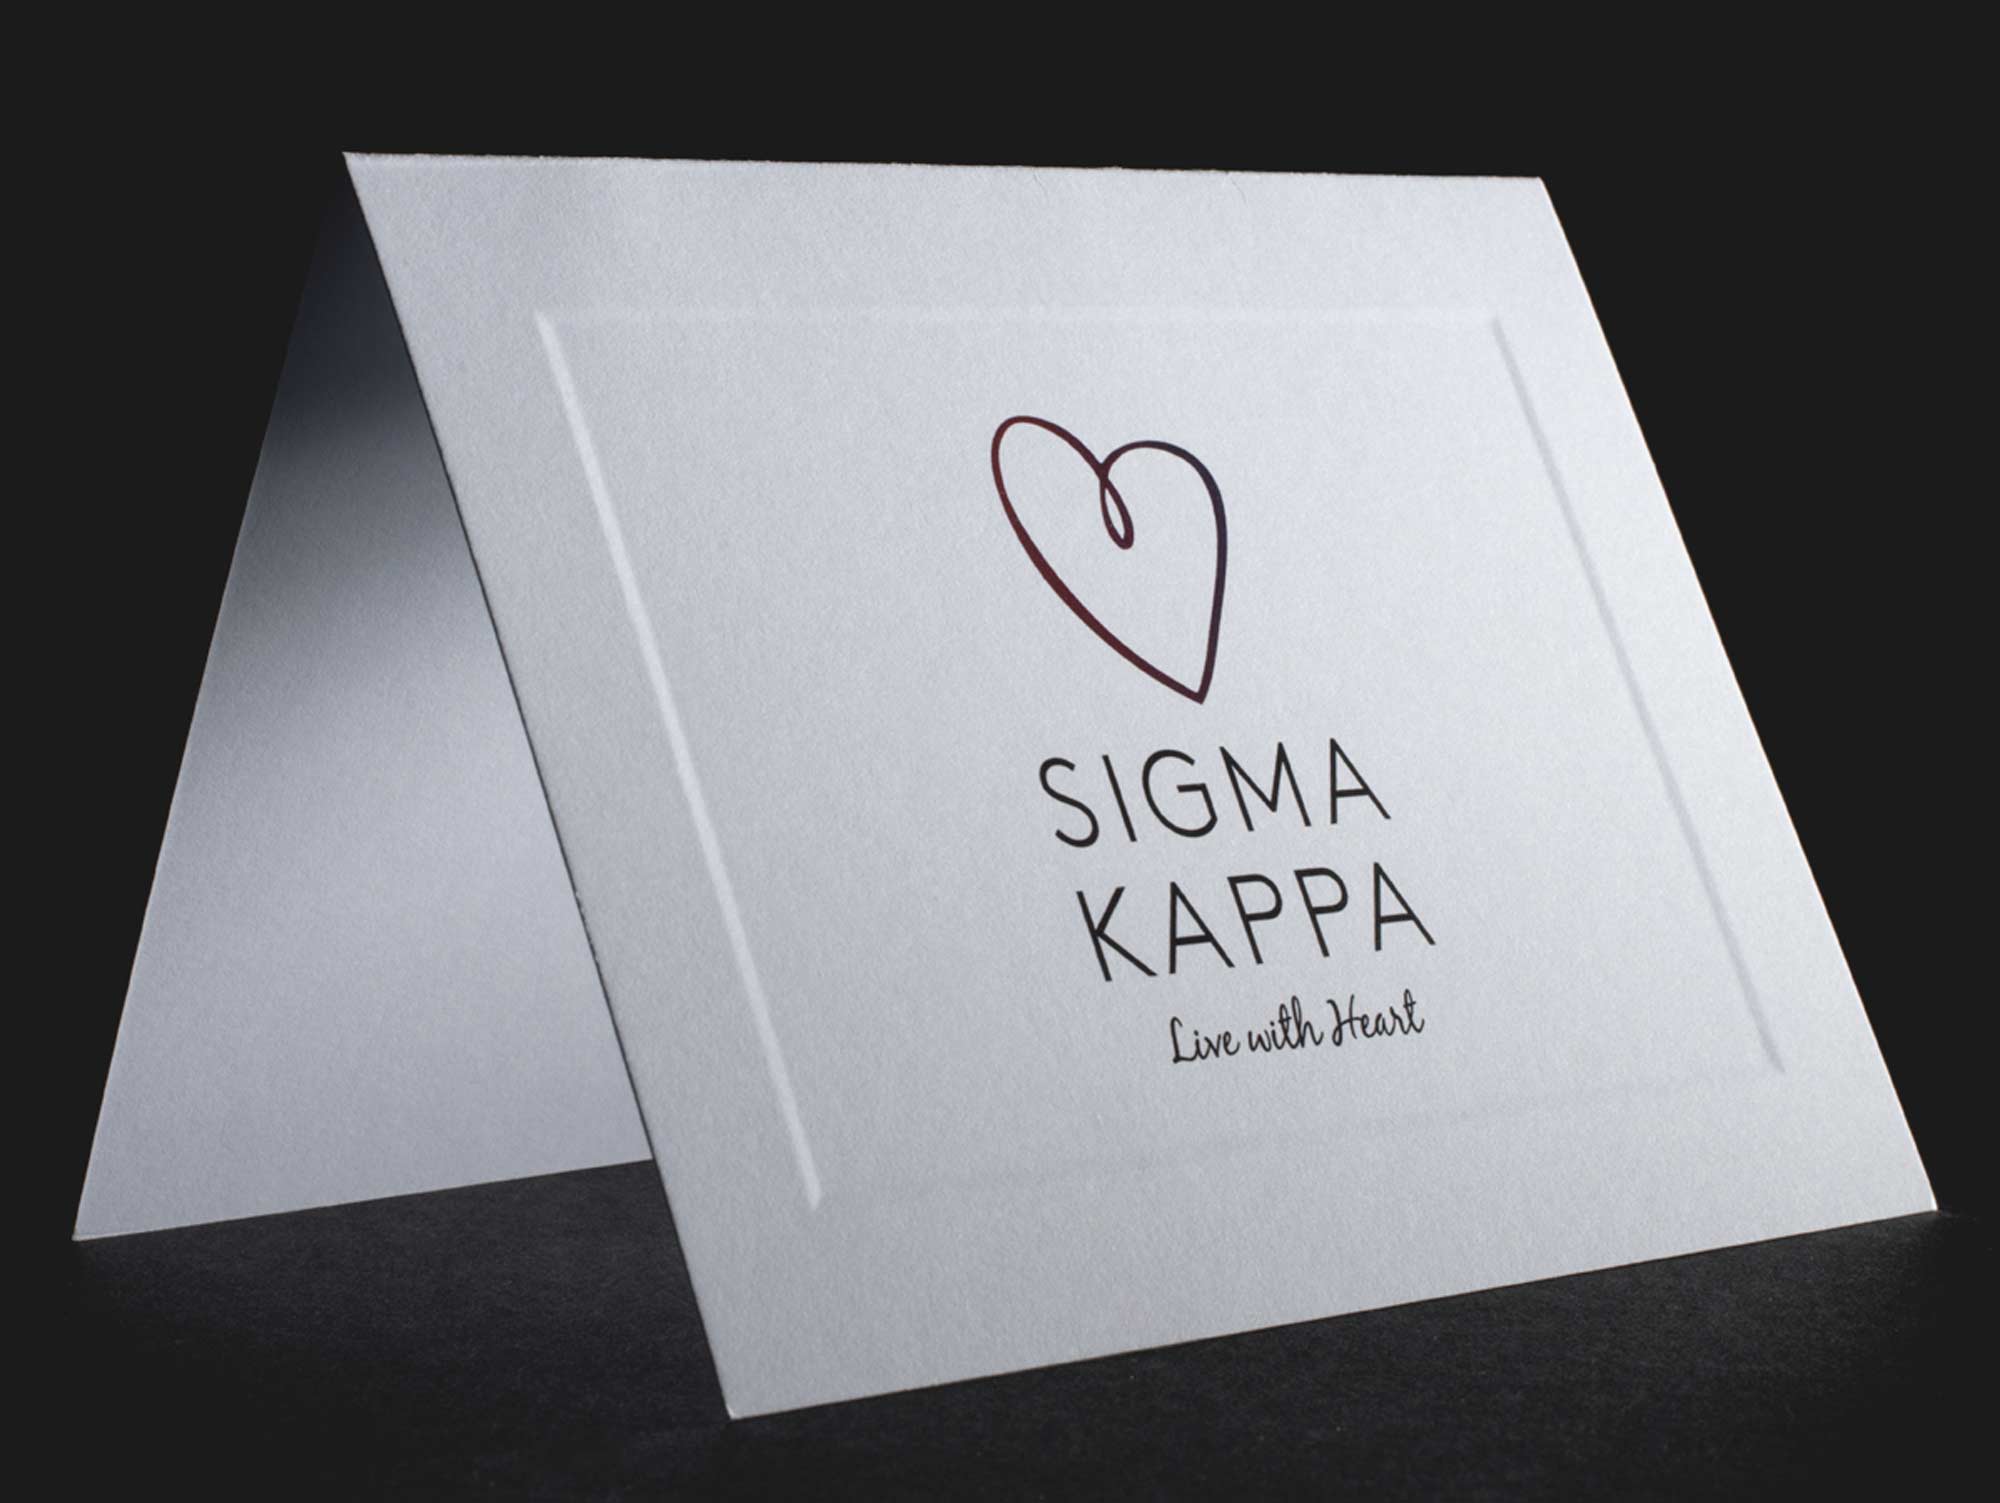 Official Notecards with New Graphic Standard Sigma Kappa